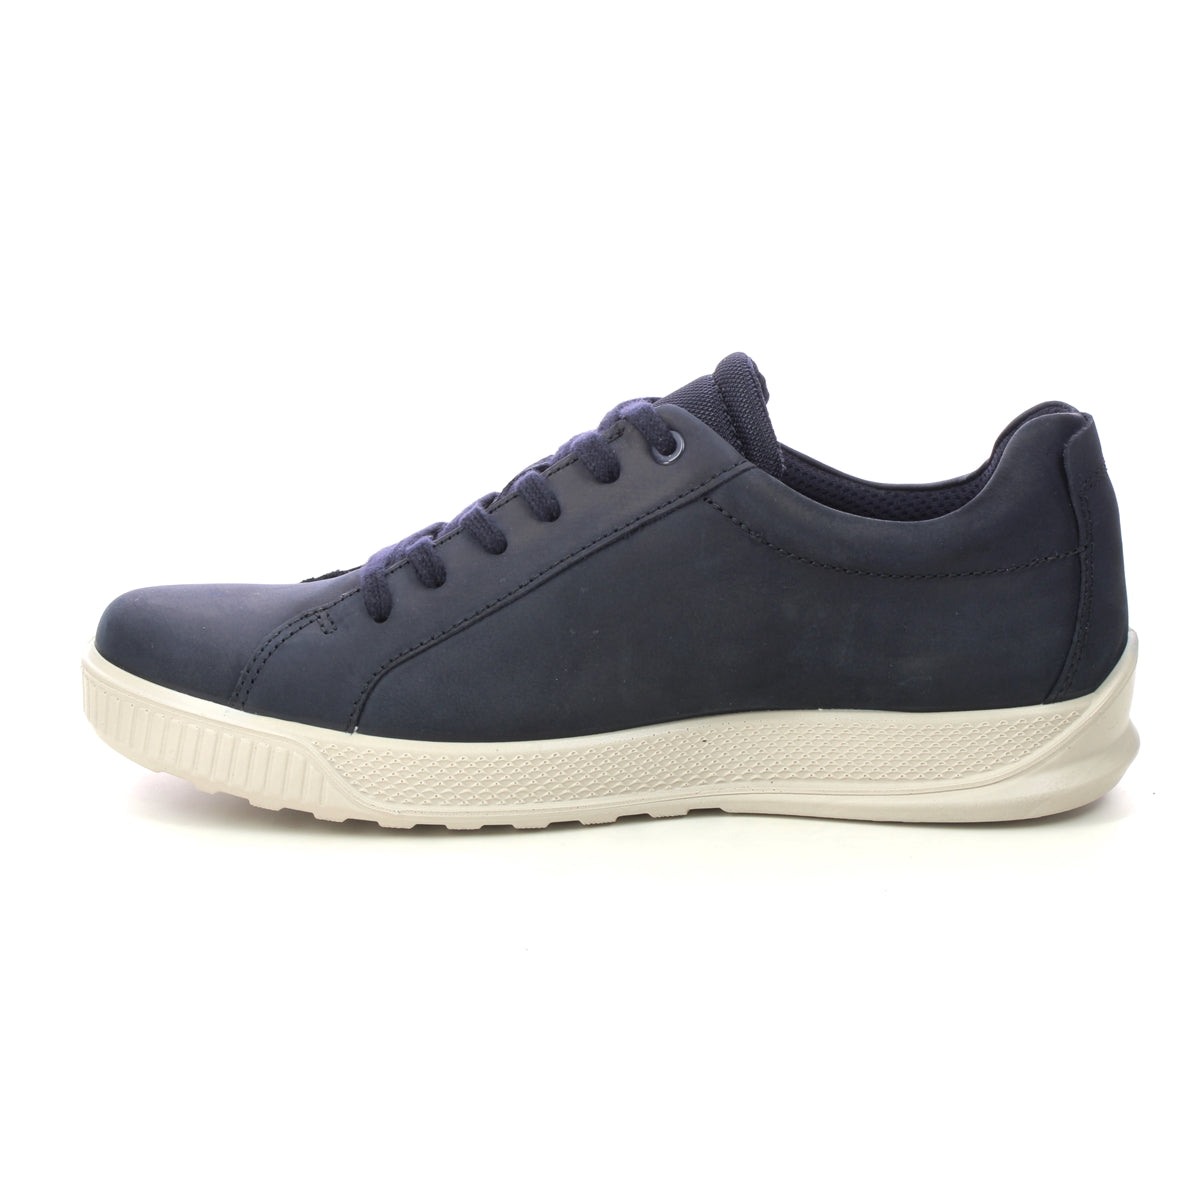 Ecco 501594 51117 Byway Night Sky Trainers